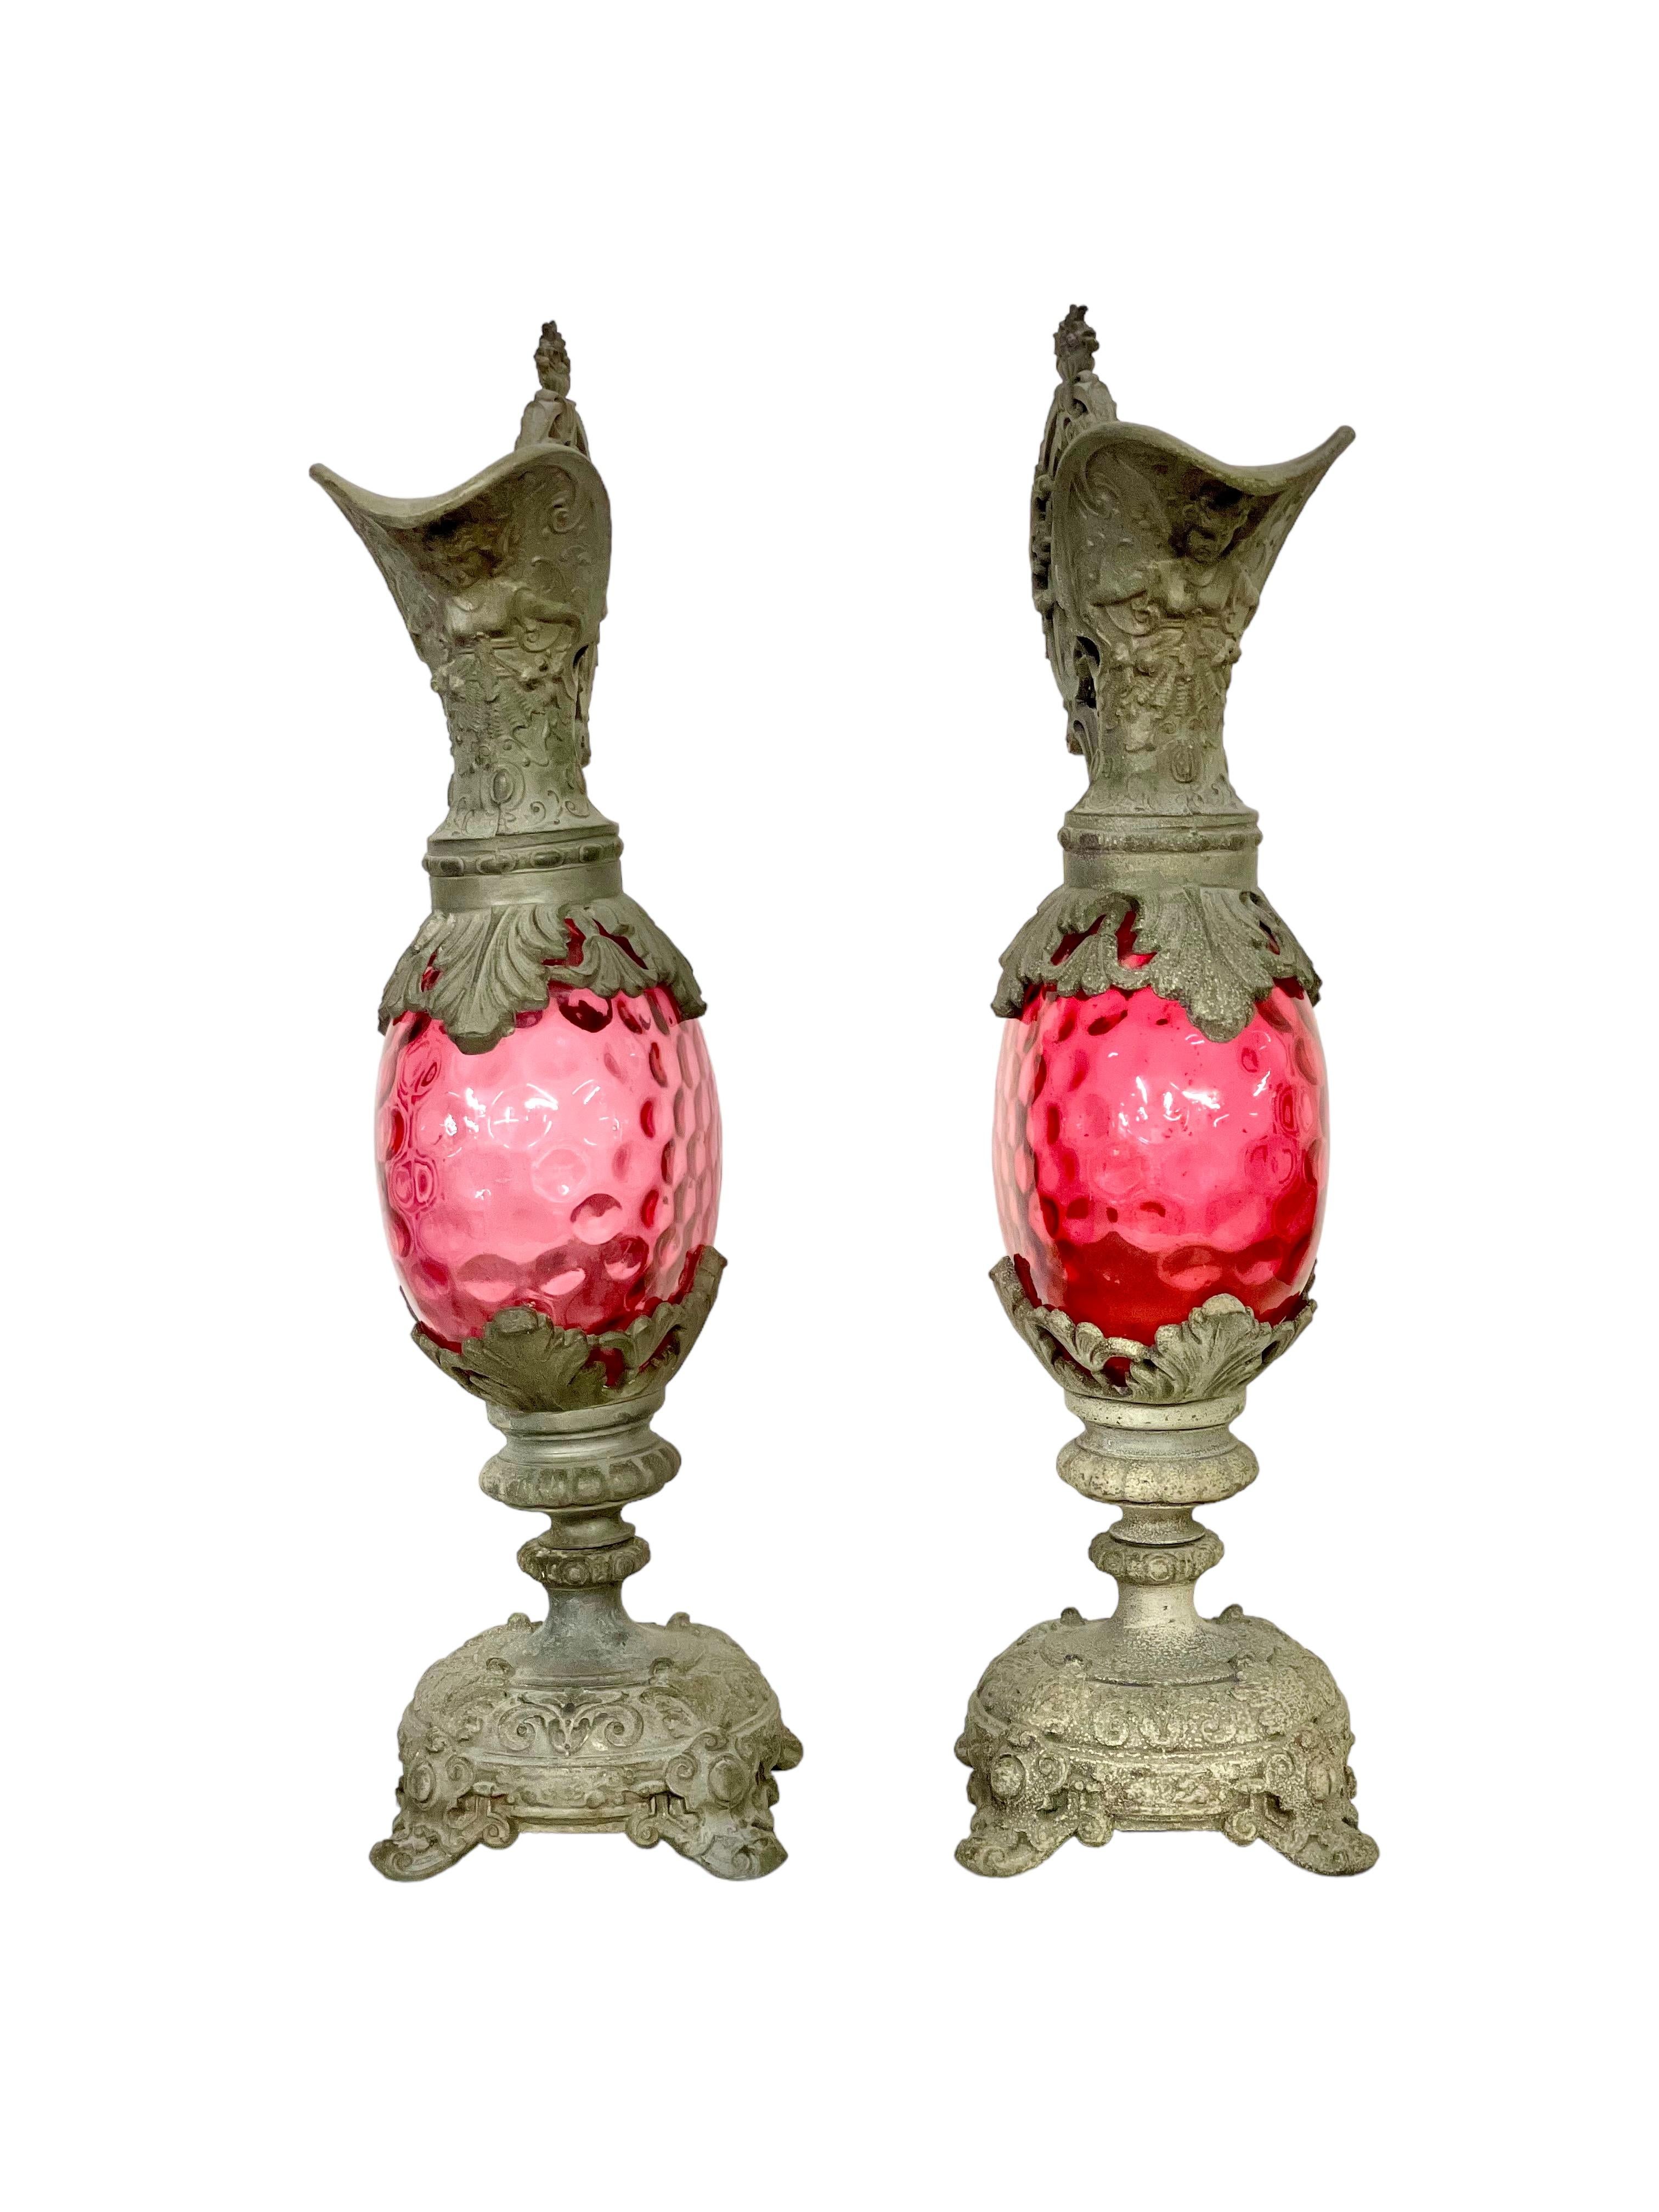 A most elegant pair of Napoleon III period decorative mantle ewers, exquisitely crafted from silver-plated metal with globe-shaped reservoirs of cranberry-coloured glass. These delightful mid-19th century jugs feature extremely ornate high handles,